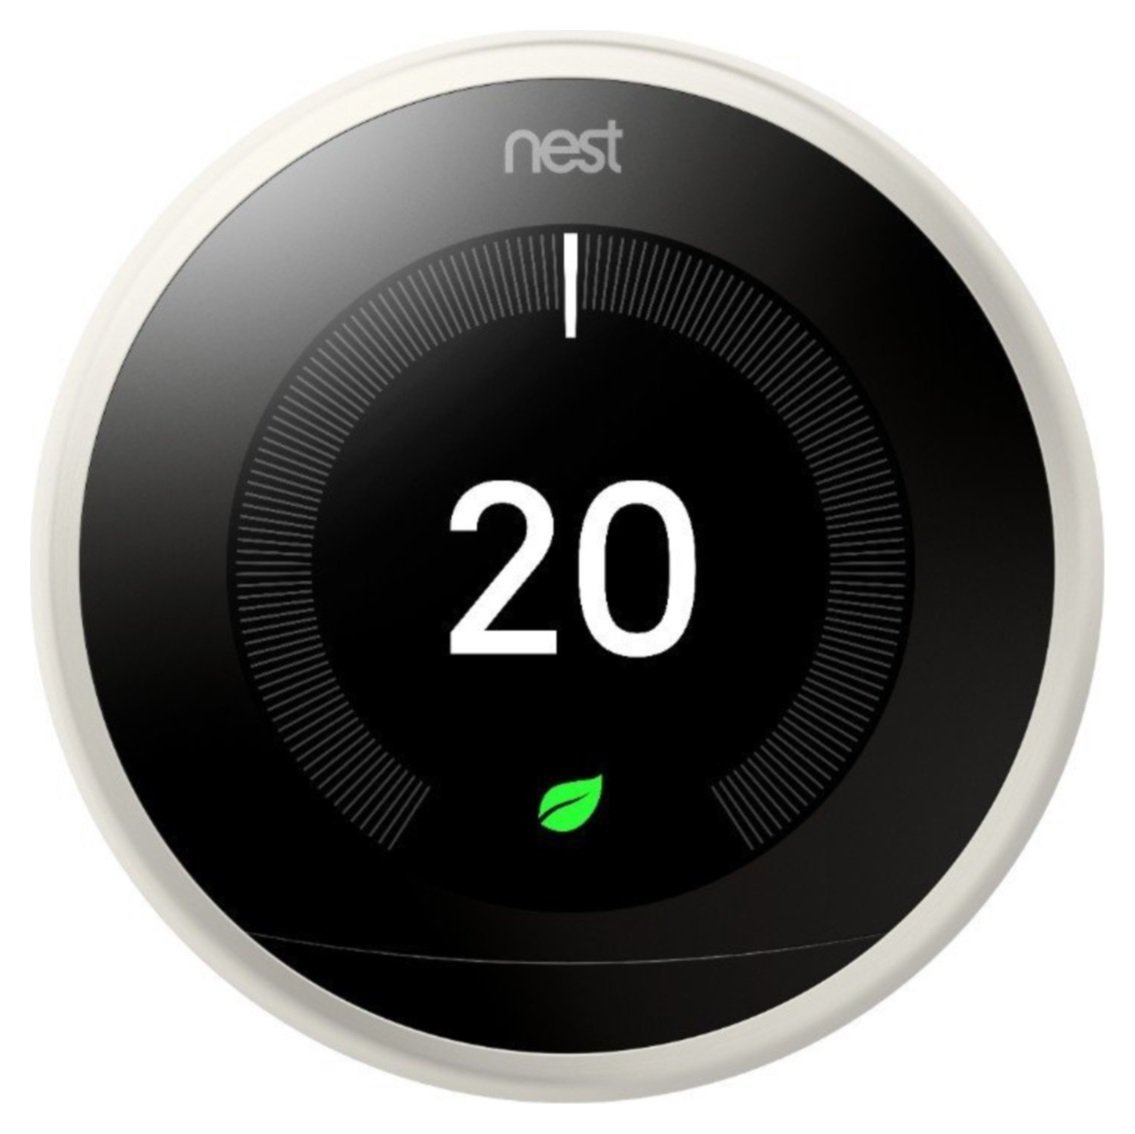 Google Nest Learning Thermostat 3rd Generation - White